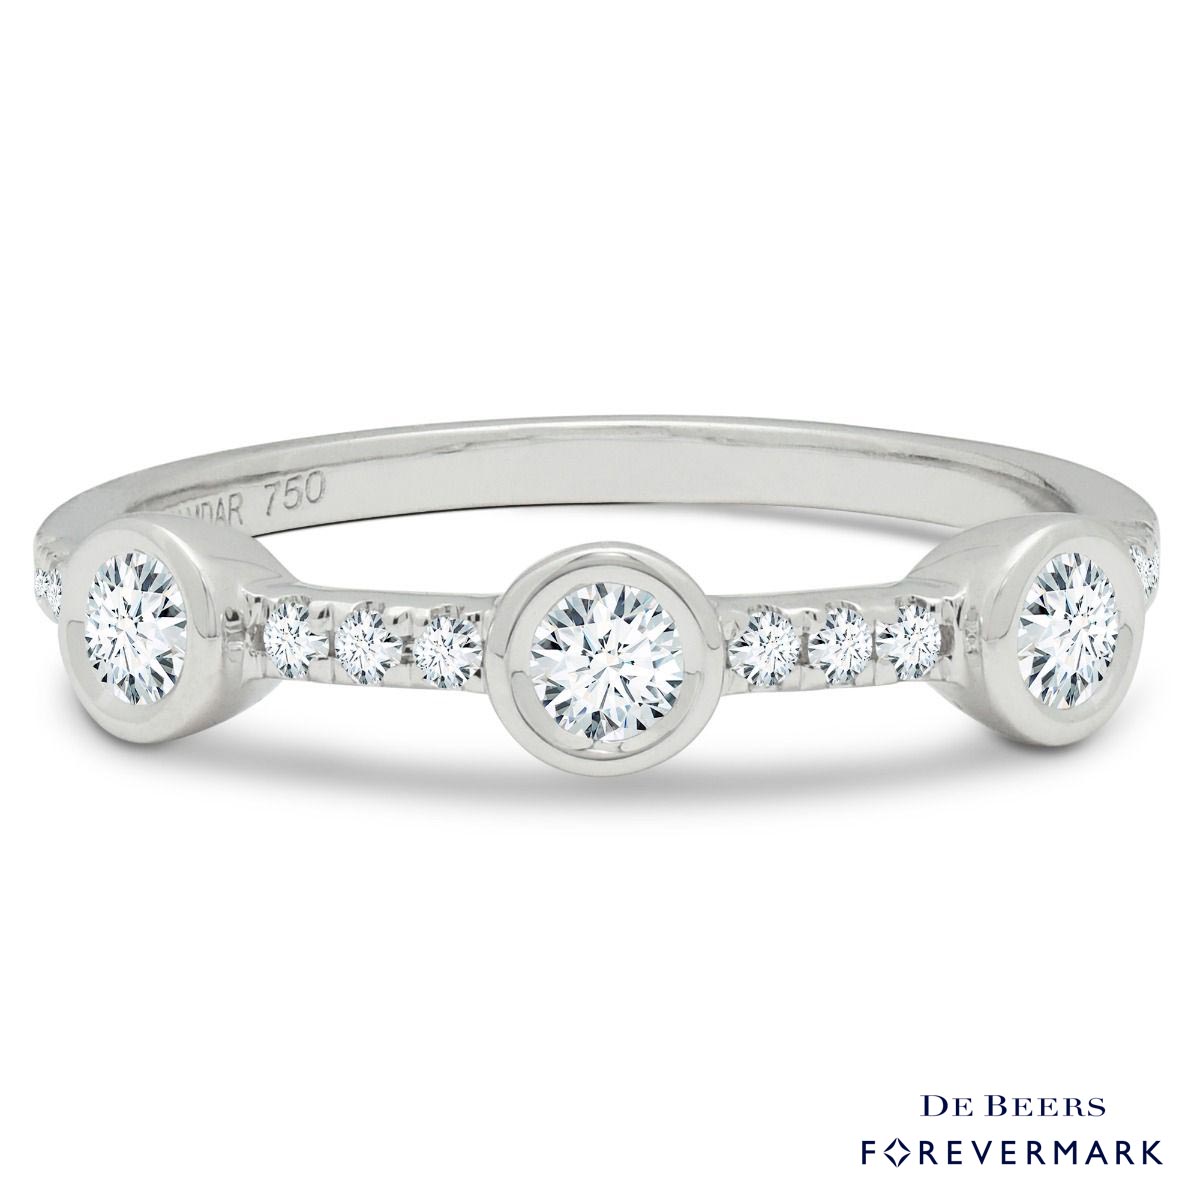 De Beers Forevermark Tribute Collection Diamond Stackable Ring in 18kt White Gold (3/8ct tw)